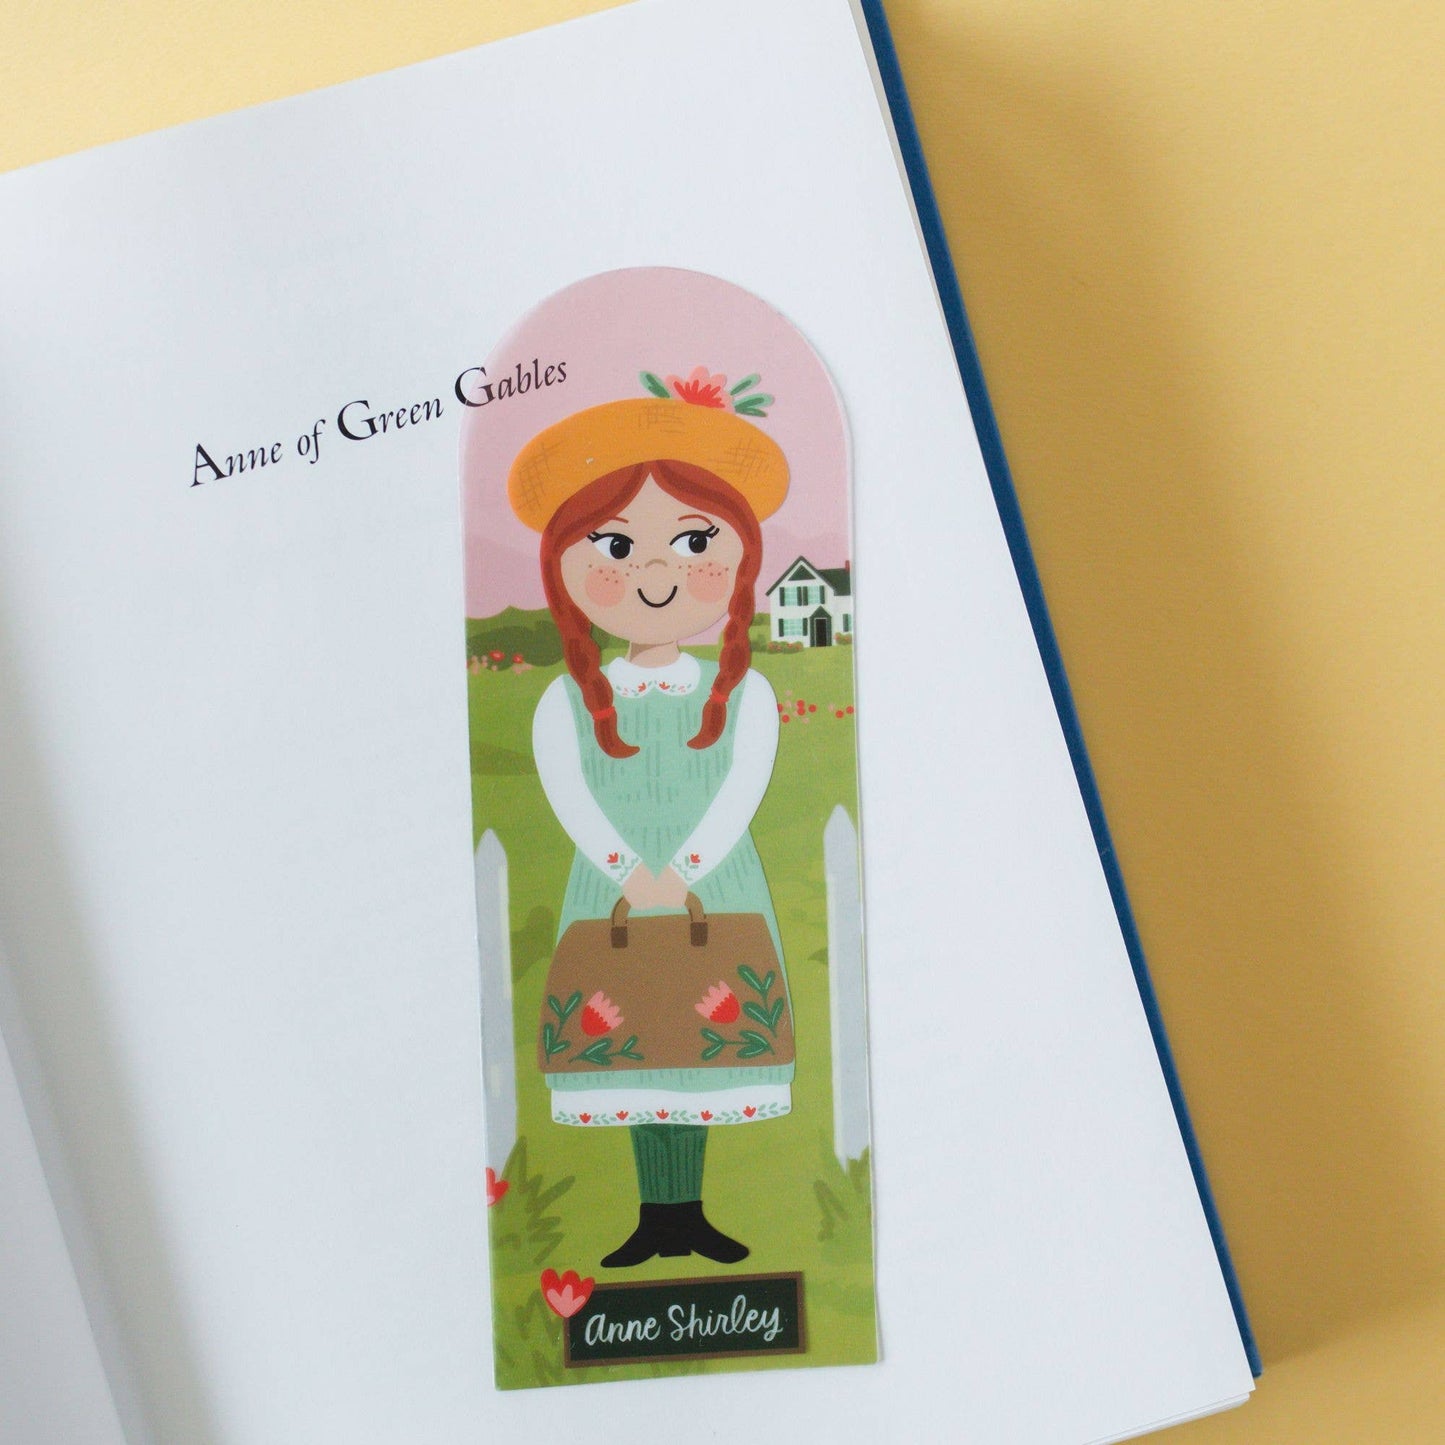 Anne of Green Gables Anne Shirley Acetate Bookmark